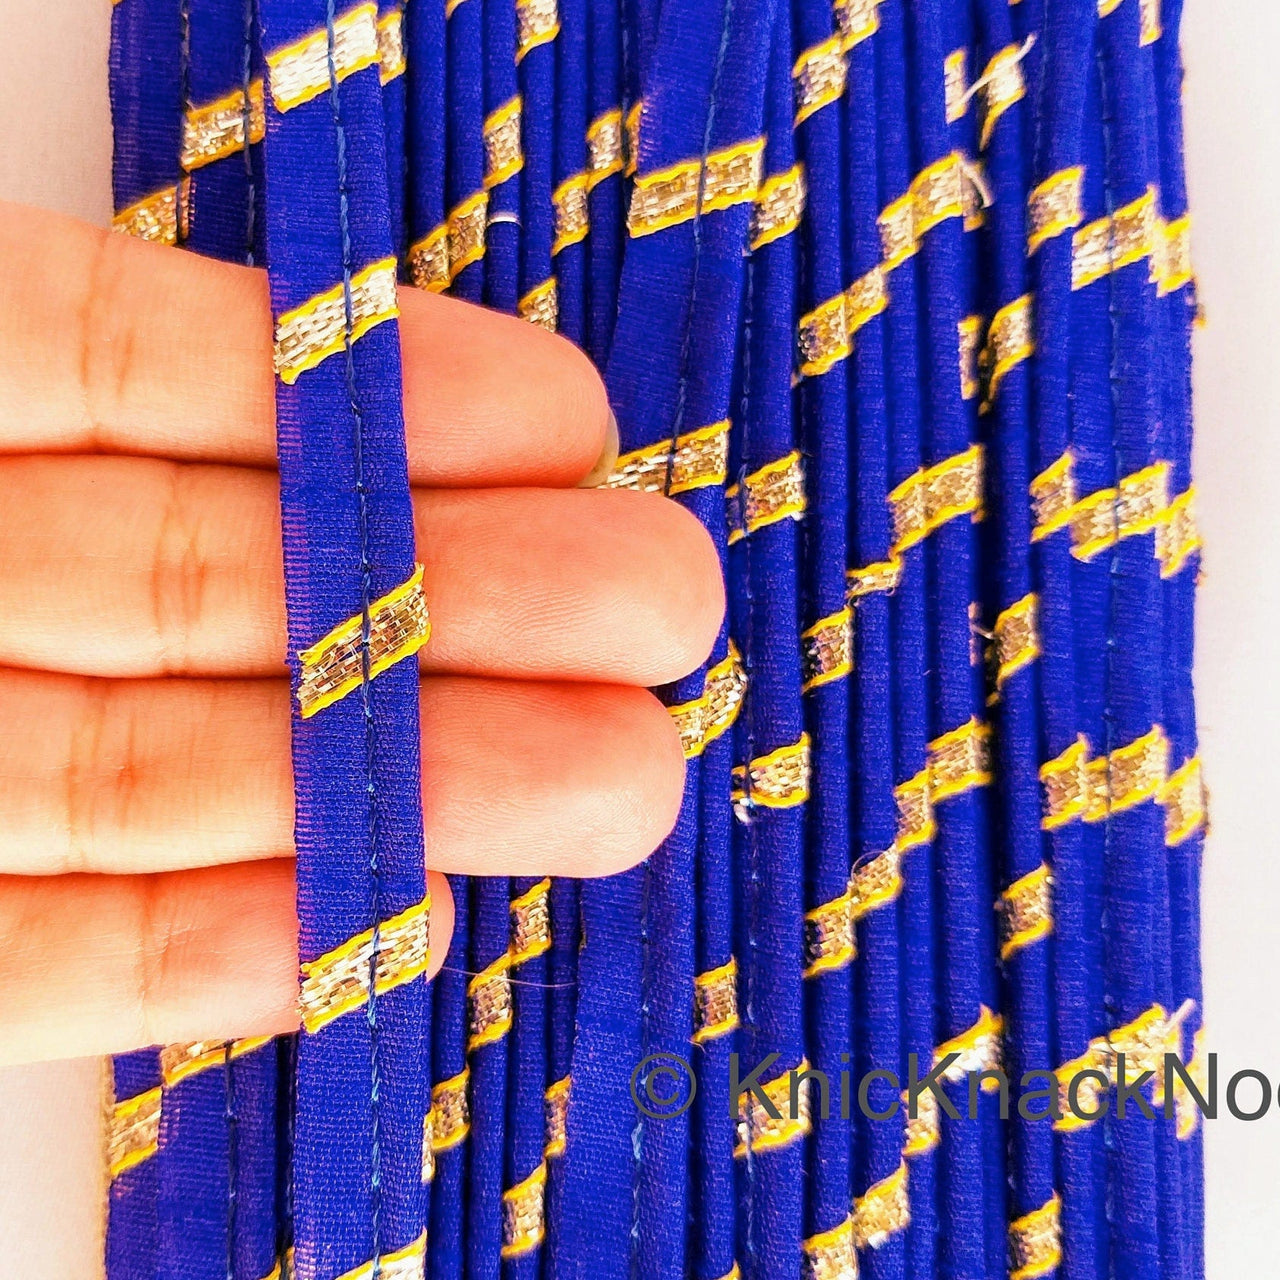 Royal Blue And Gold Stripes Piping Cord Trim, Approx. 8 mm wide, One Yard Trim